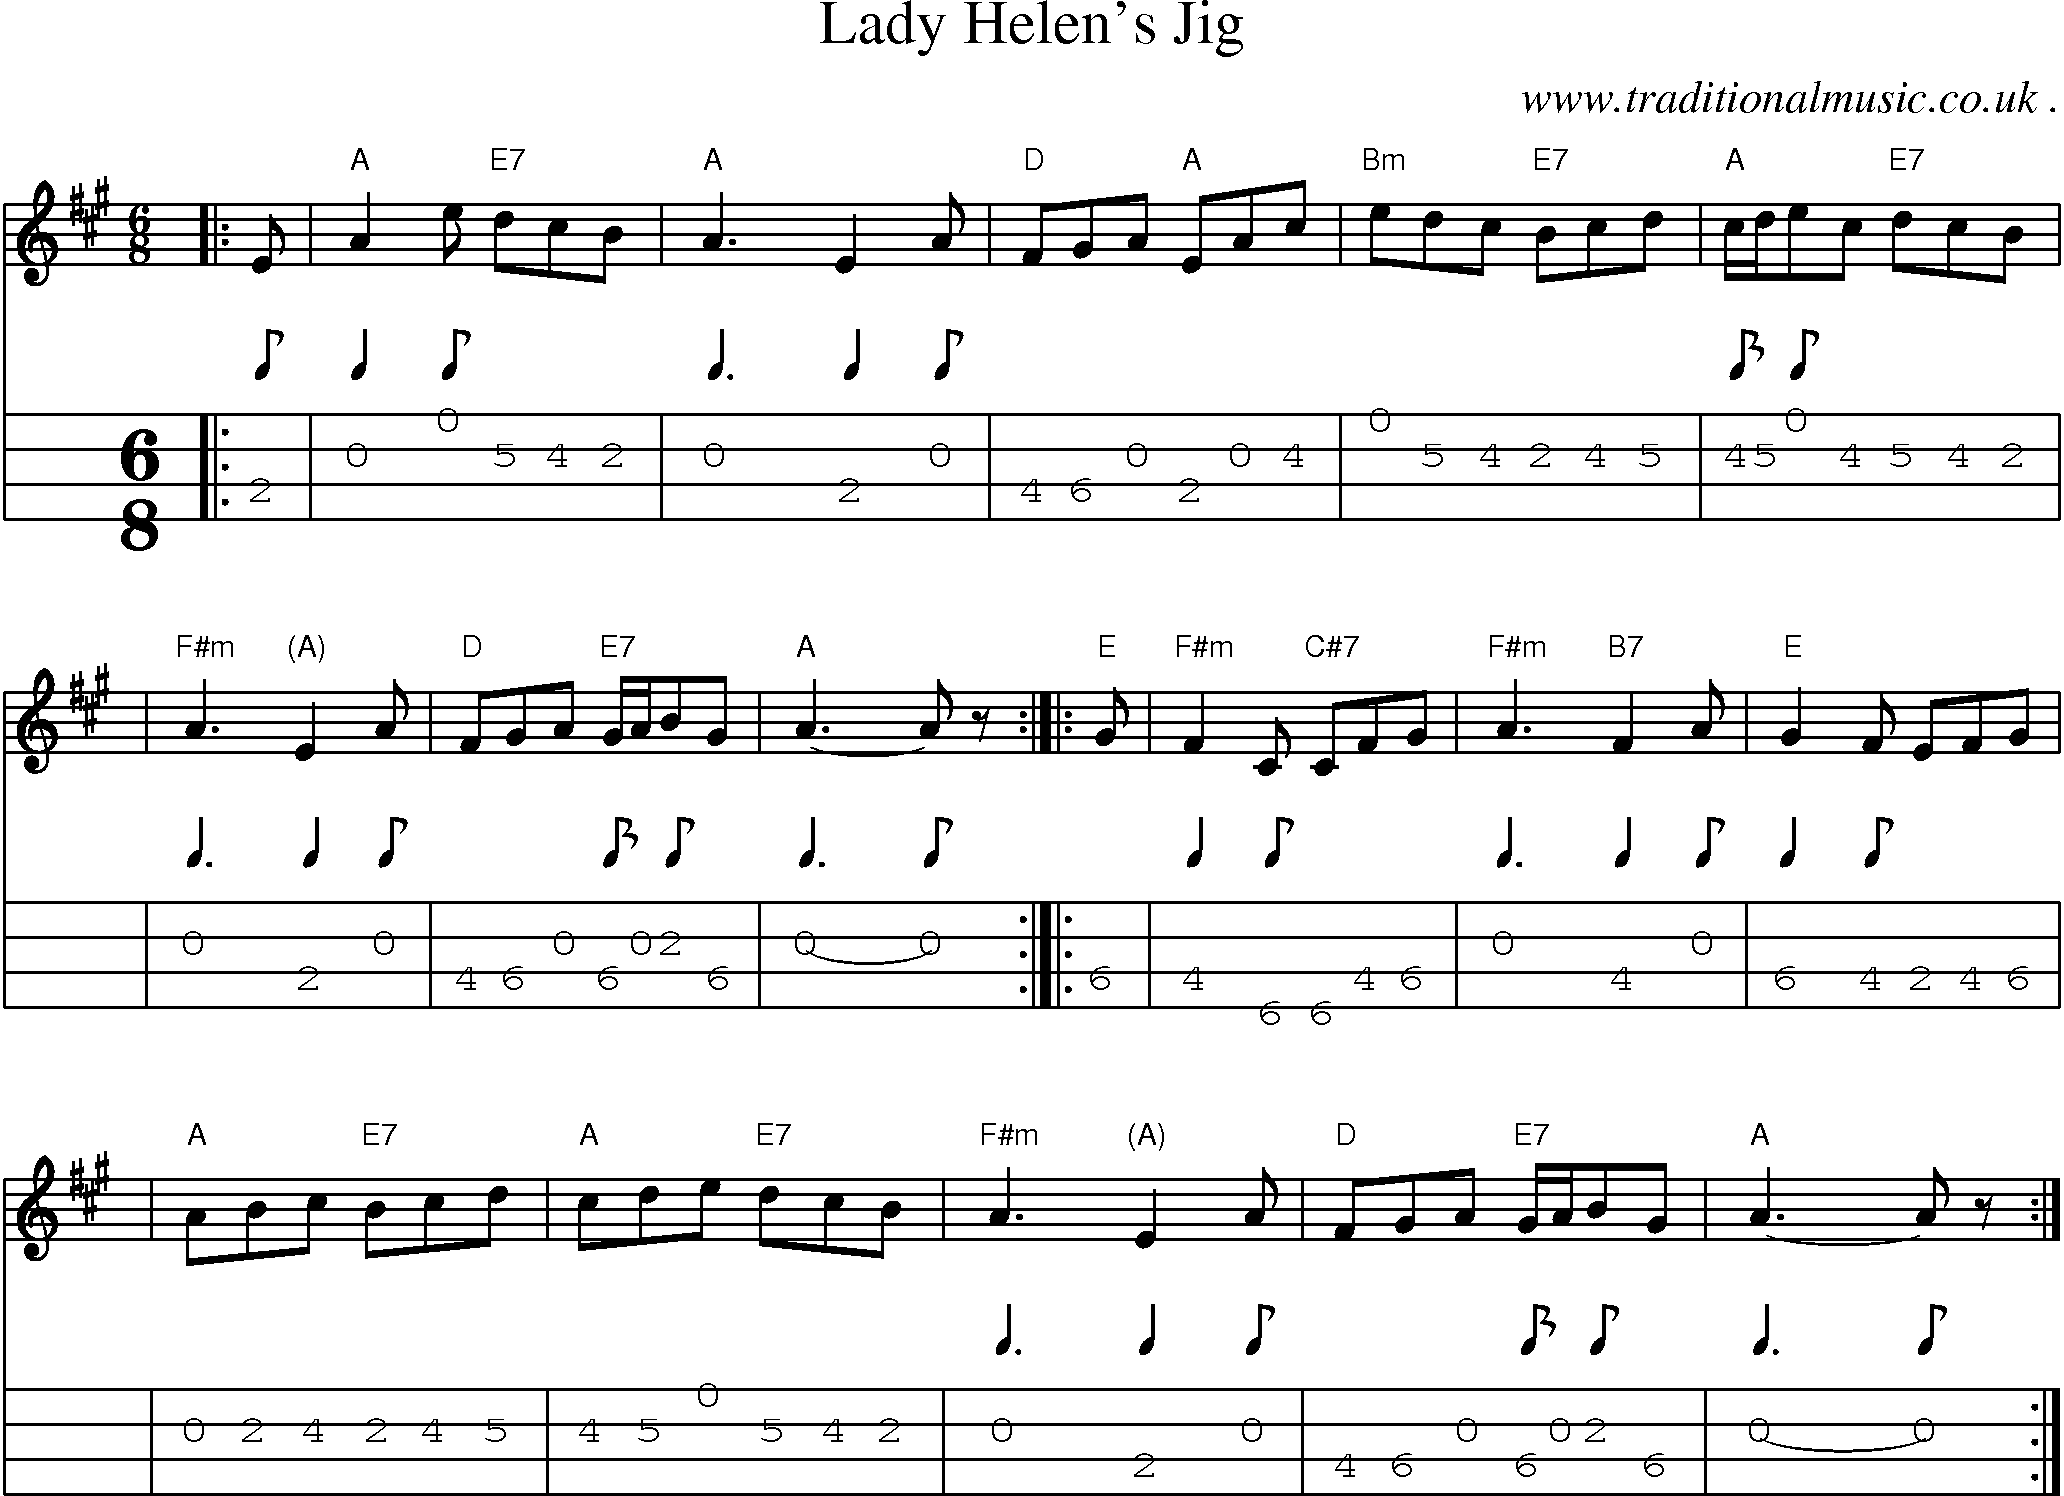 Sheet-music  score, Chords and Mandolin Tabs for Lady Helens Jig